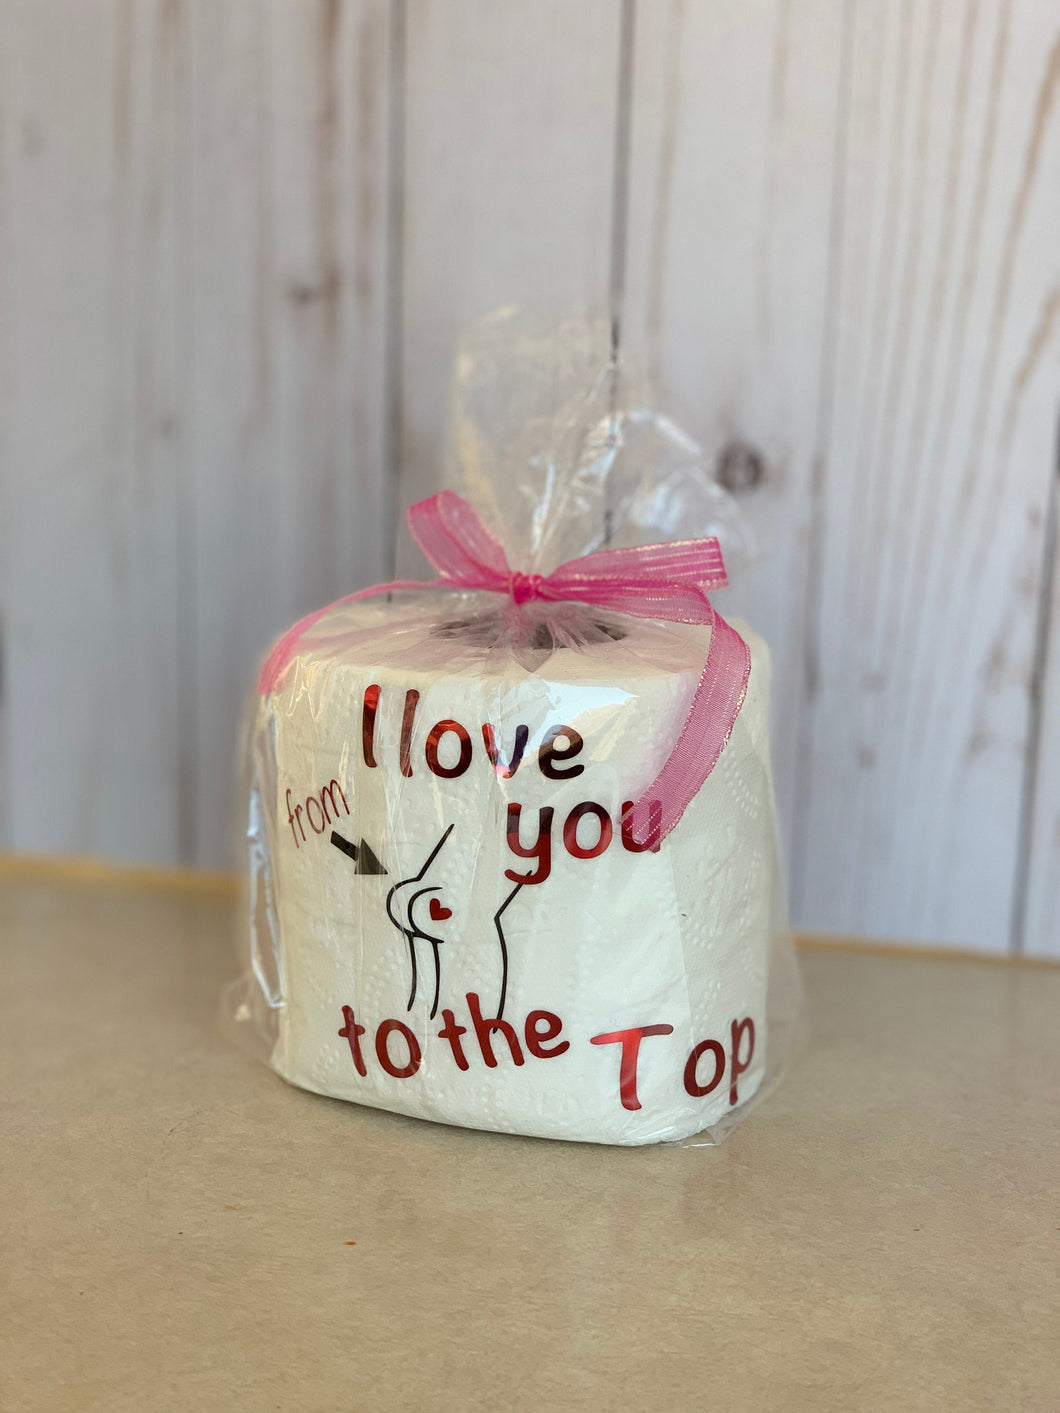 I love you from Bottom to the Top Funny Toilet Paper, Valentine's Day Gag Gift, Funny TP, Gag Gift, Birthday Funny Toilet Paper, TP humor